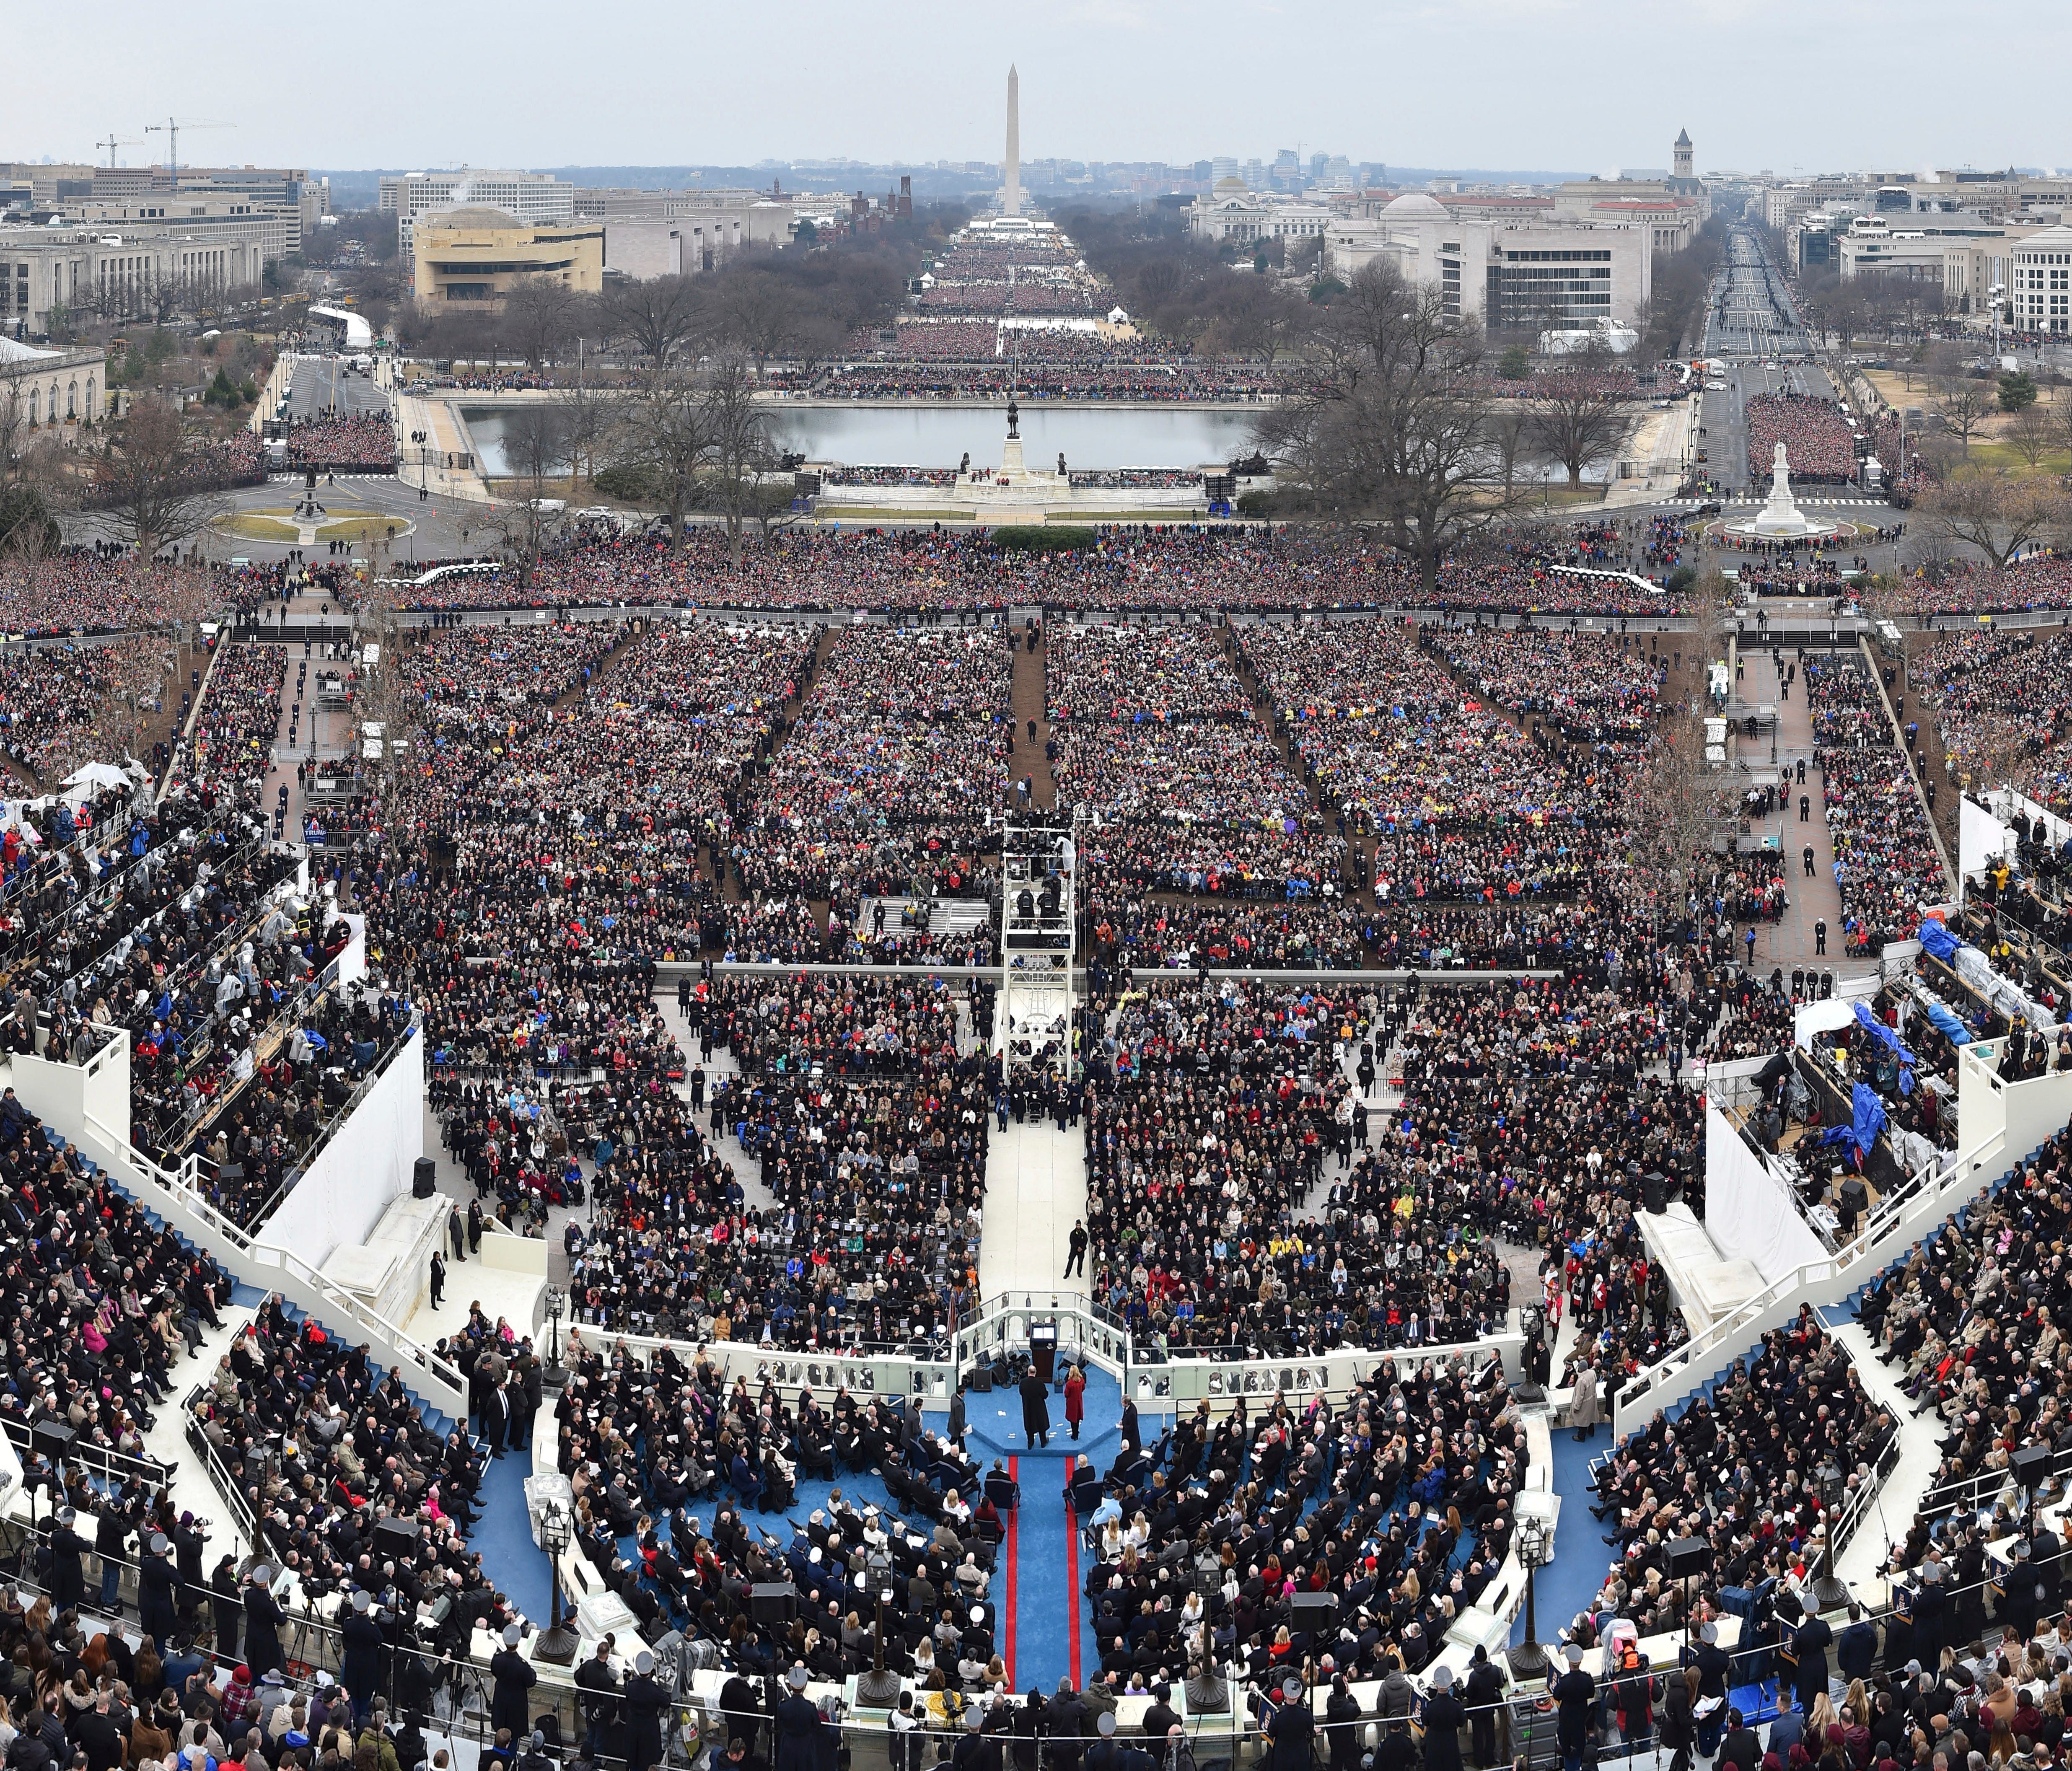 A panoramic view of President Trump's inauguration on Jan 20, 2017 at the U.S. Capitol in Washington, D.C.